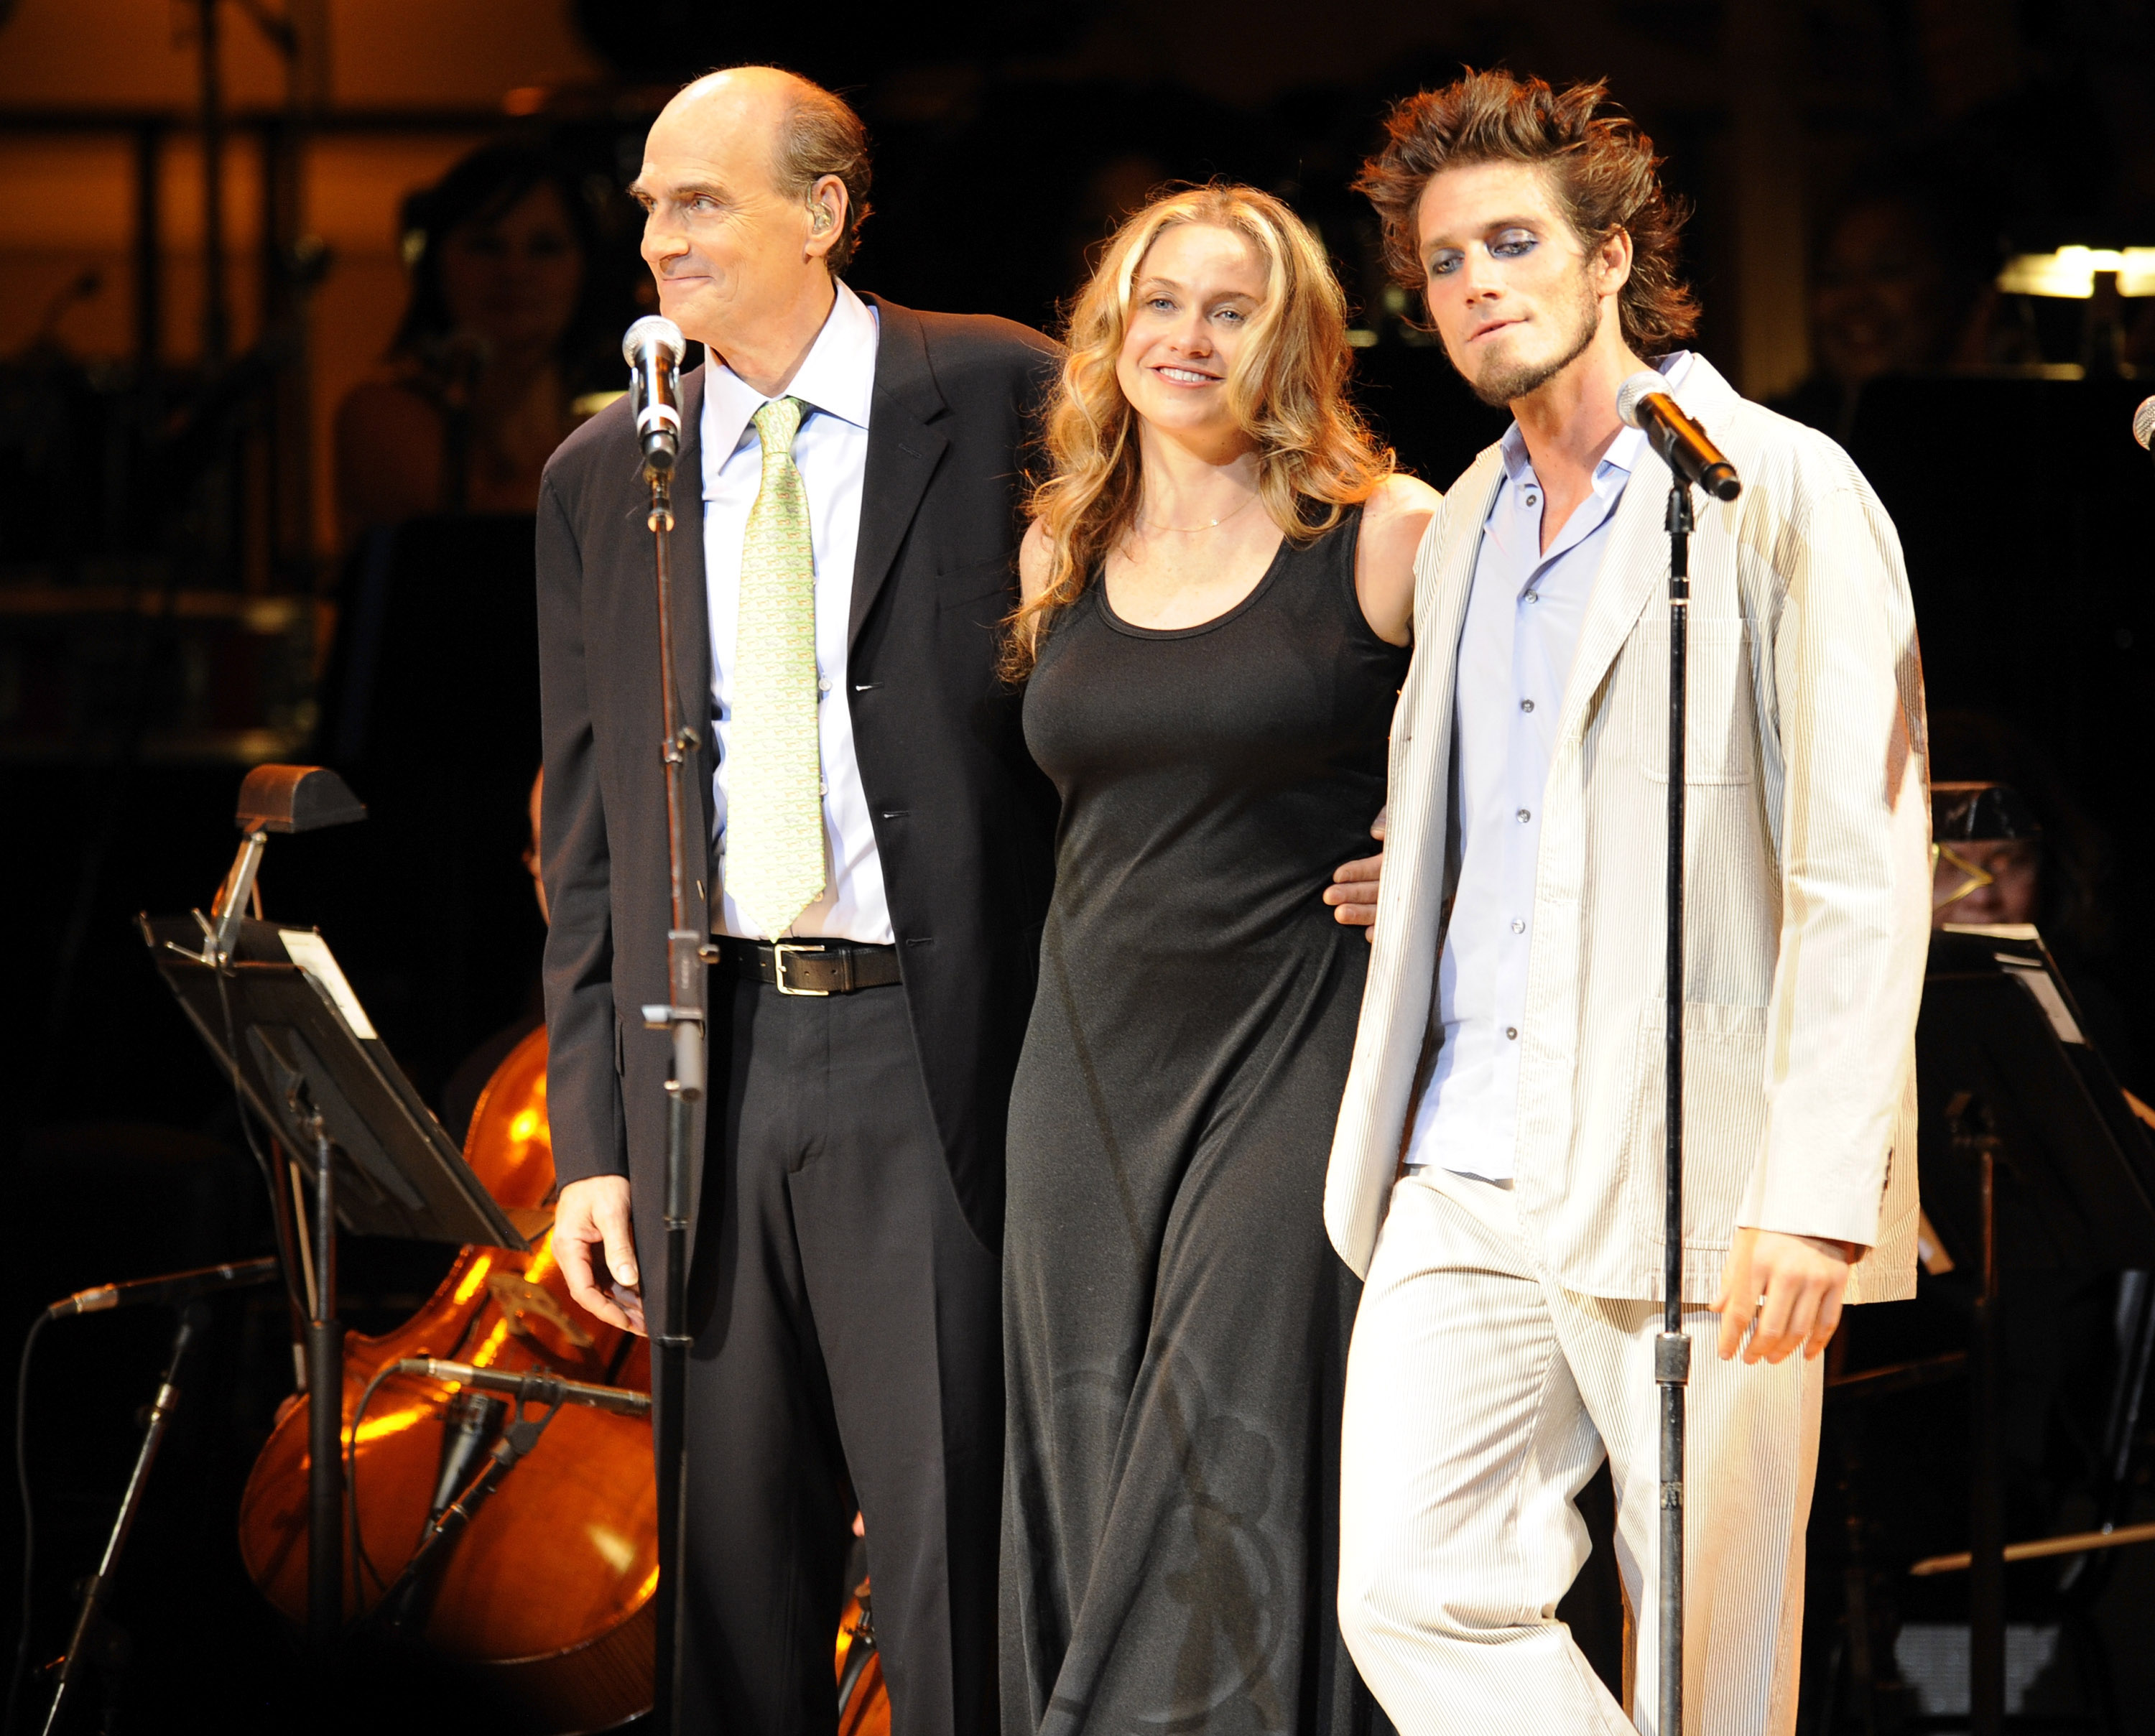 James, Sally, and Ben Taylor on stage during the Rainforest Foundation Fund Benefit Concert at Carnegie Hall in New York City on May 8, 2008. | Source: Getty Images